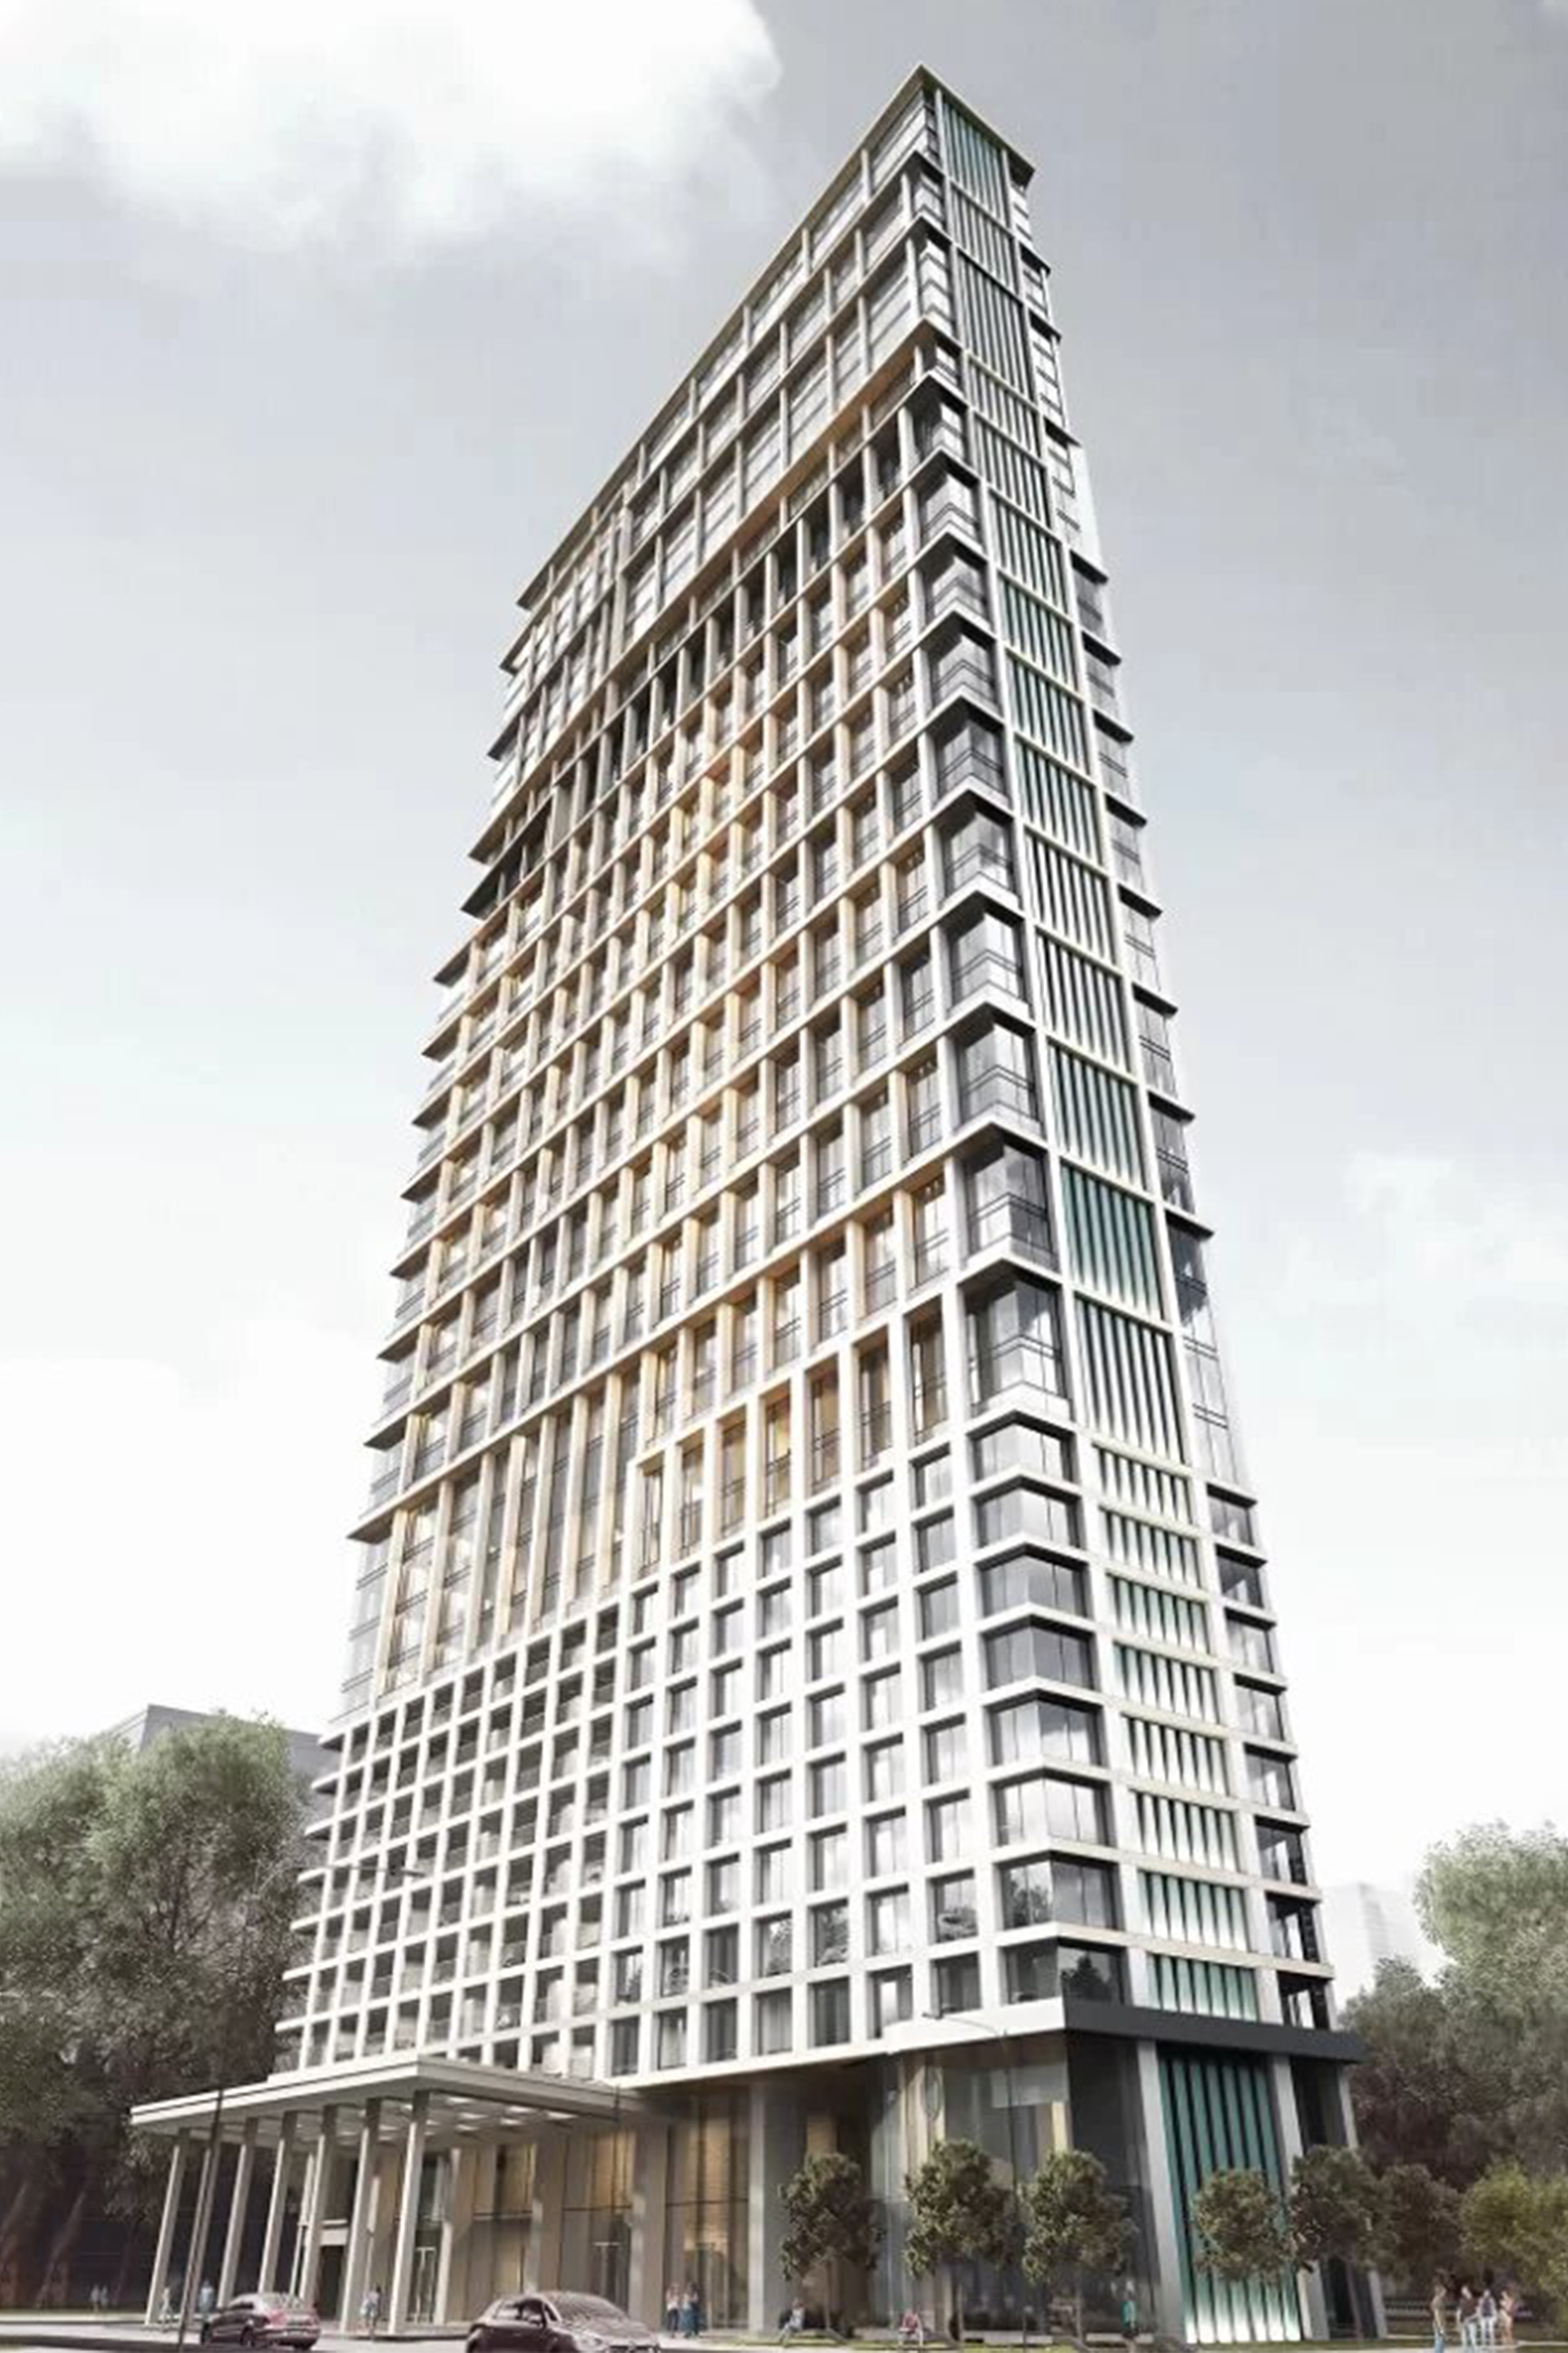 Architectural CG Render for a High-Rise